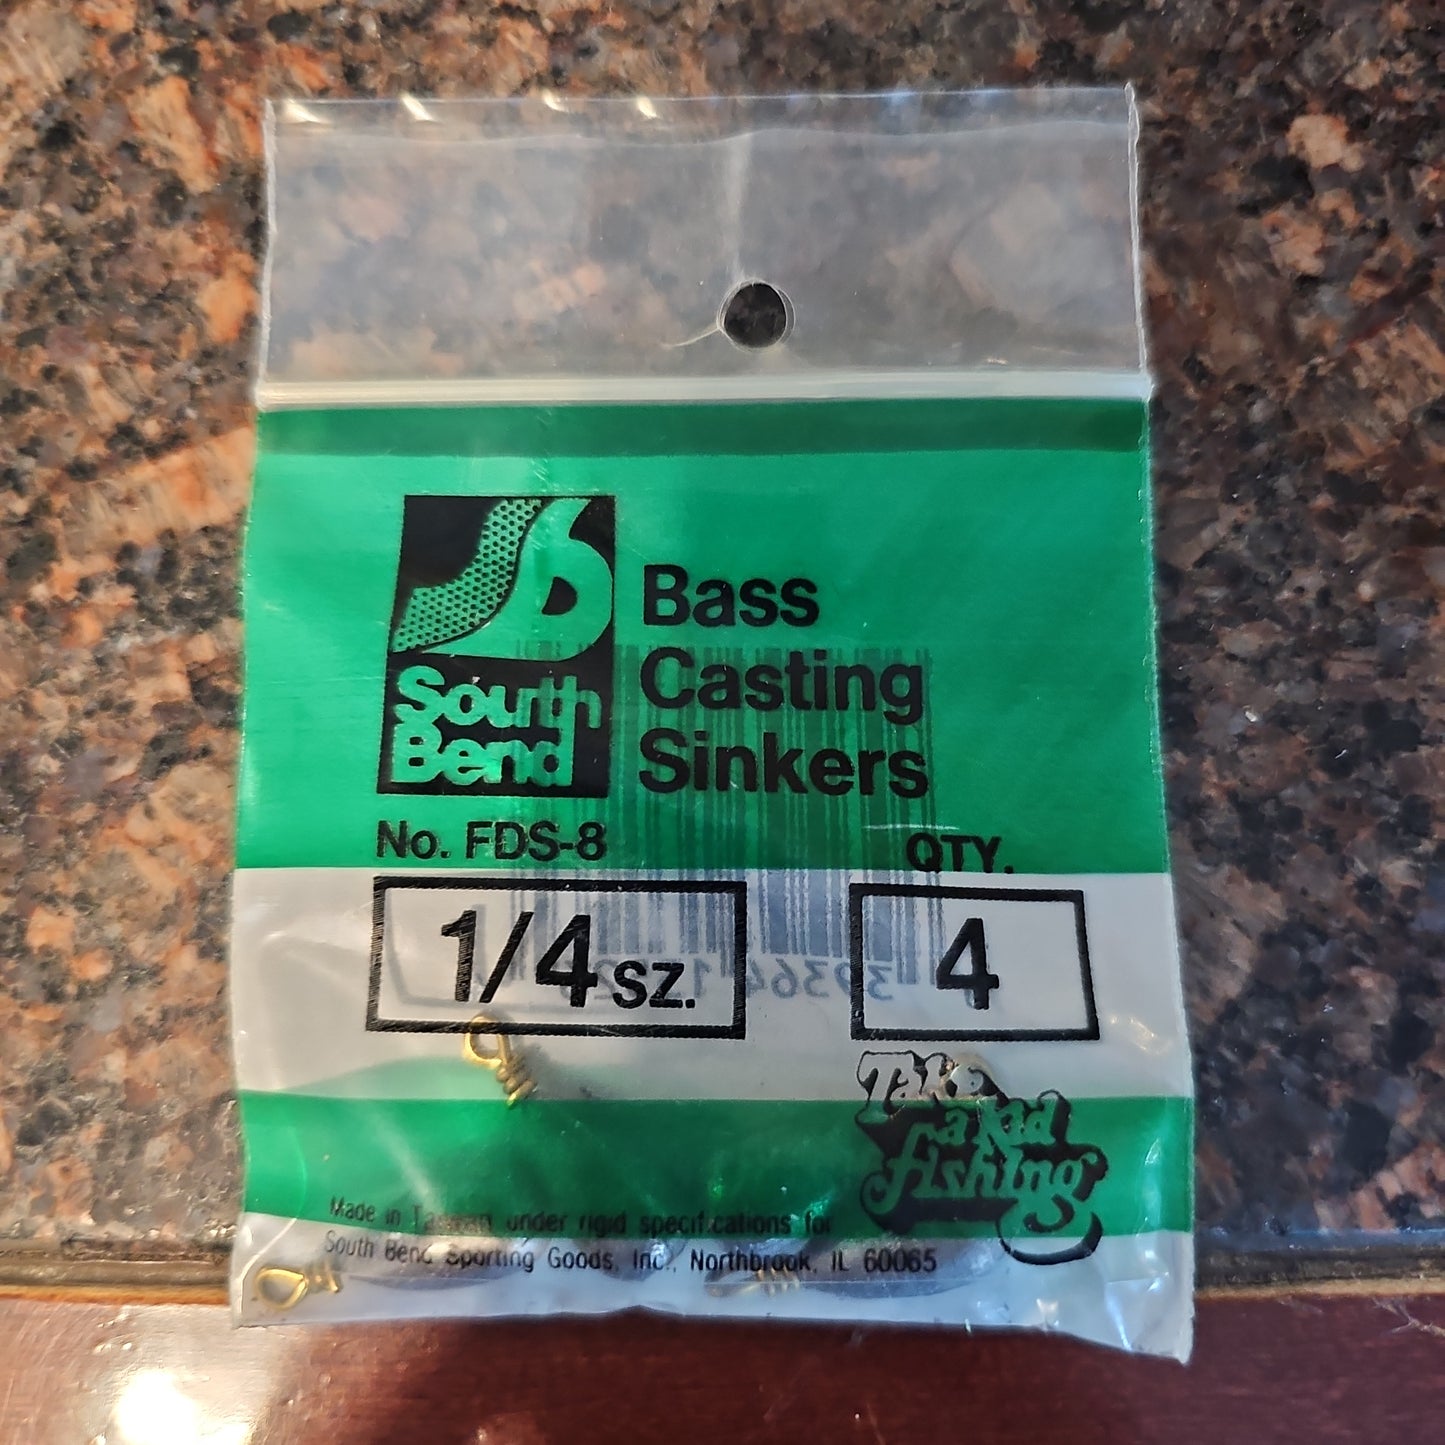 South Bend Casting Sinkers